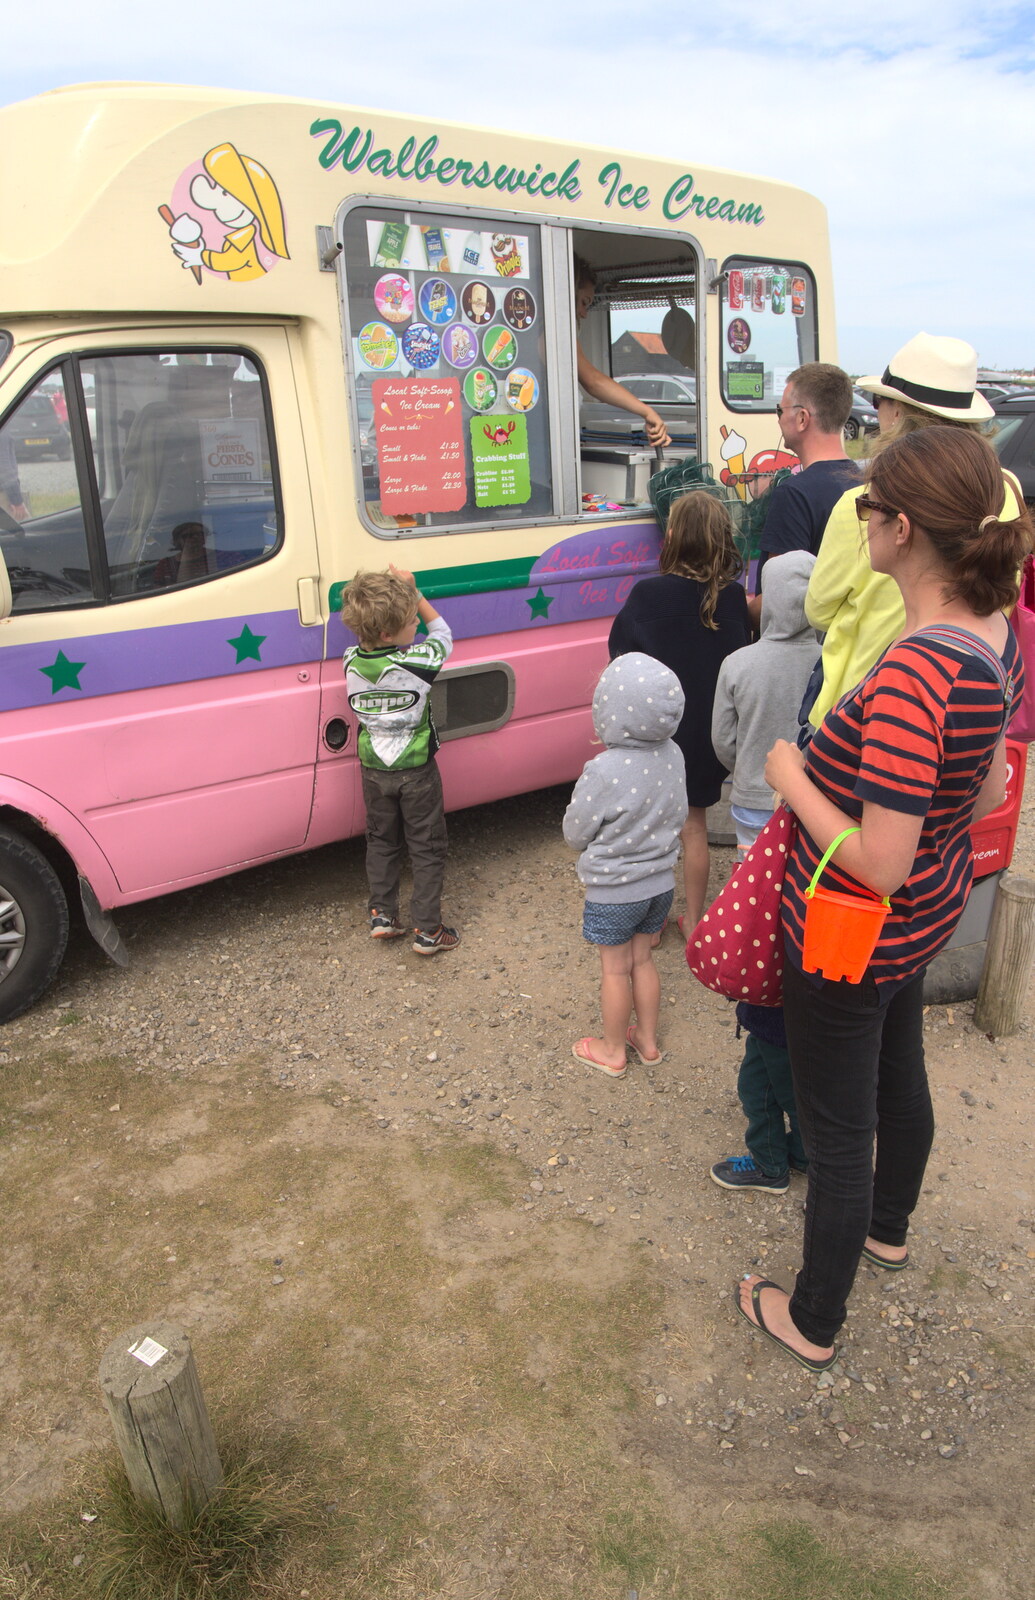 Time for ice cream from The Danger of Trees: A Camping (Mis)adventure - Southwold, Suffolk - 3rd August 2015